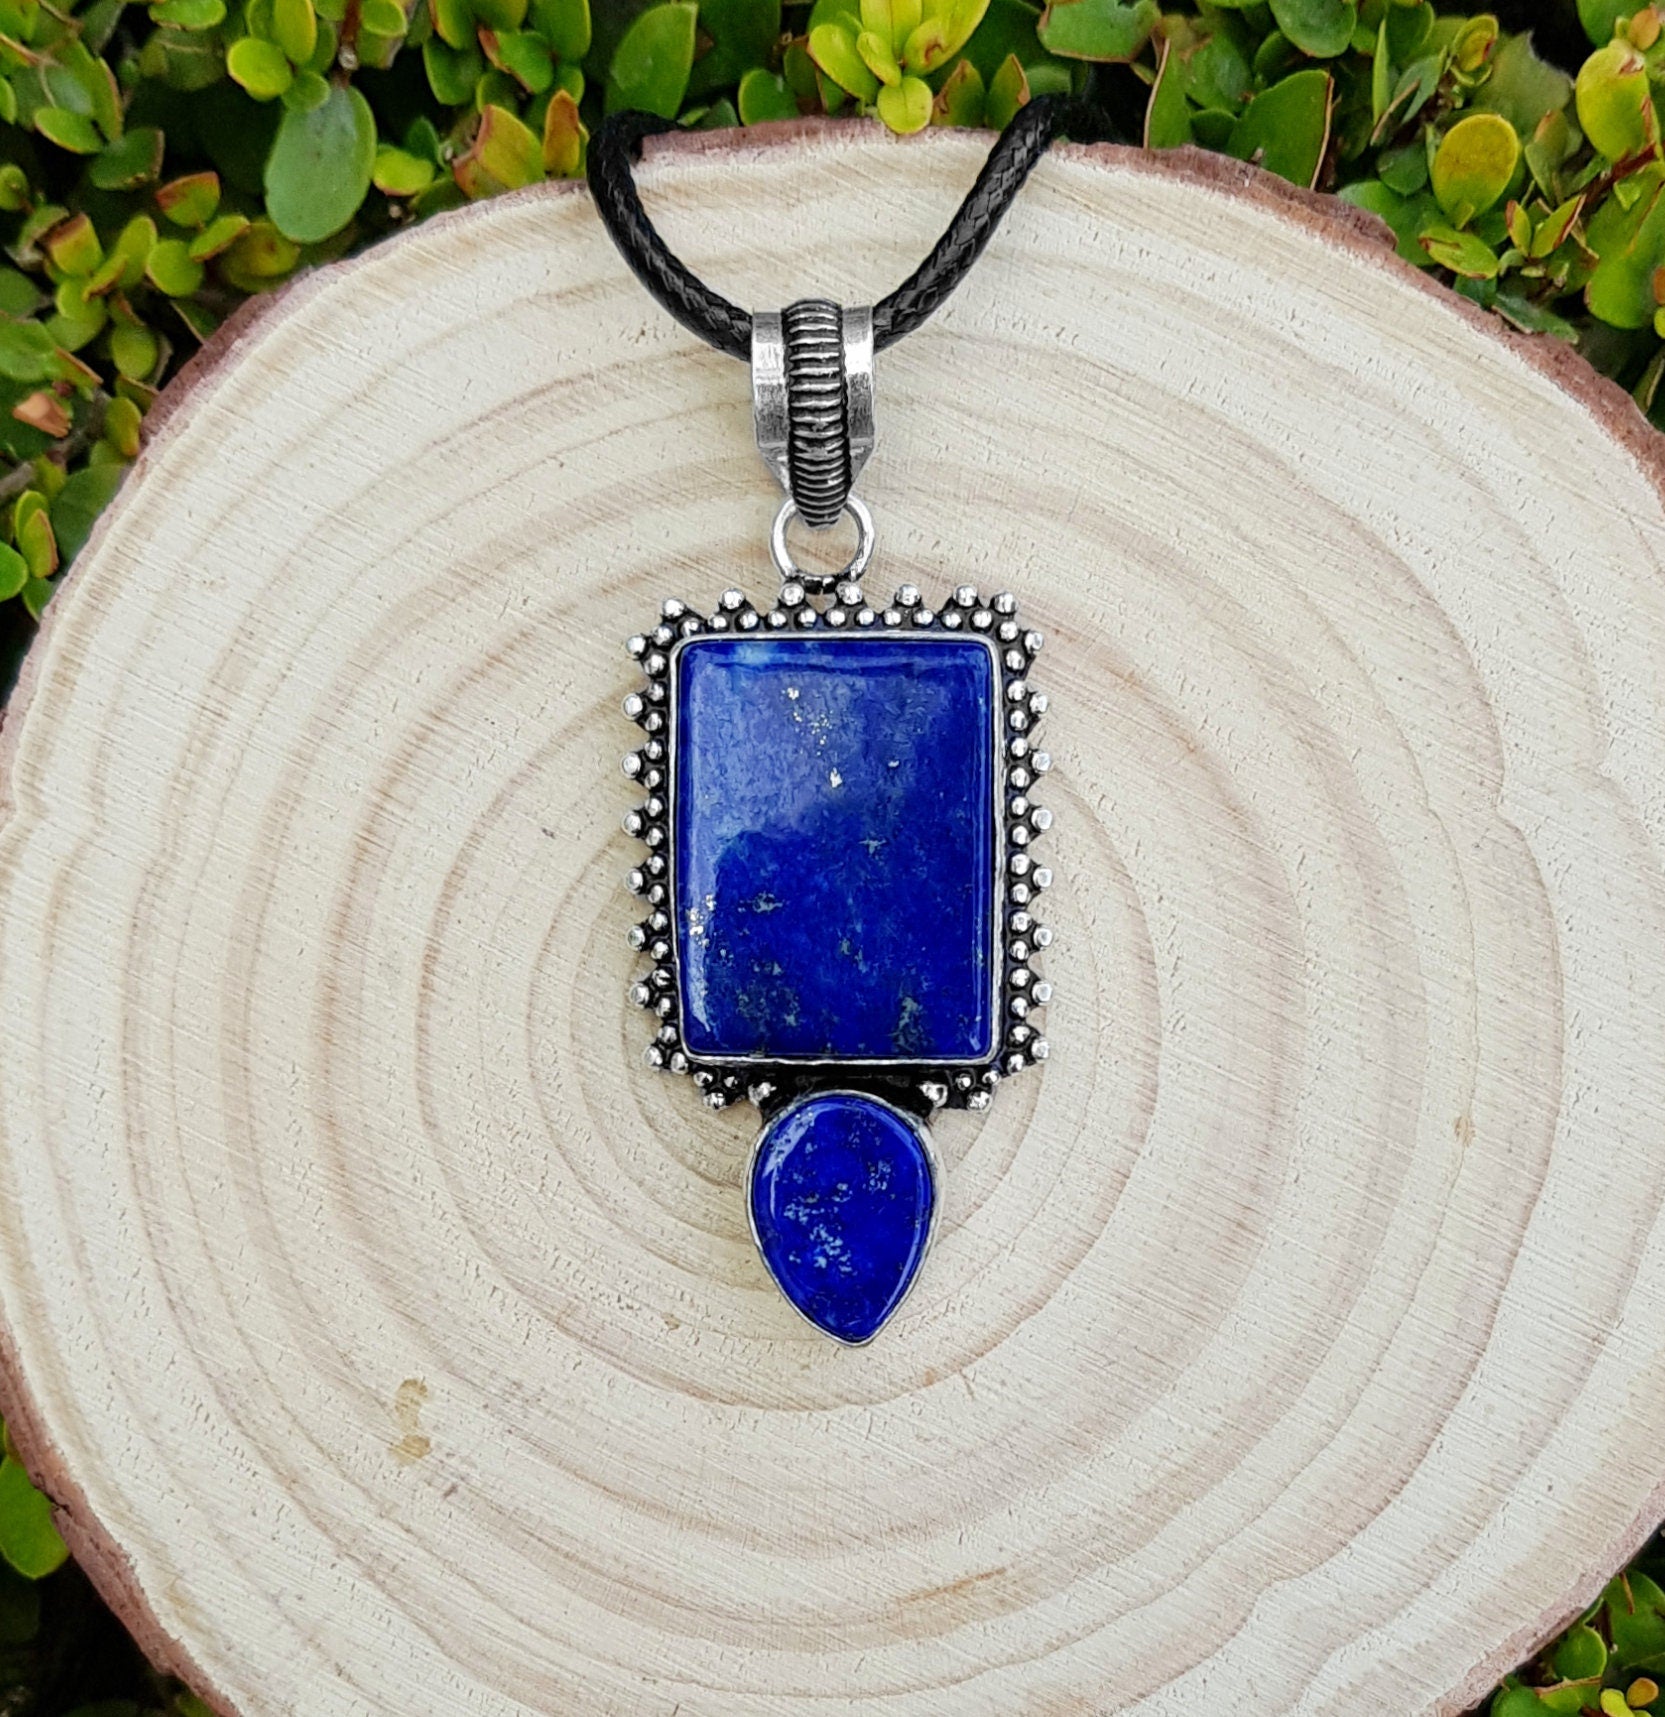 Lapis Lazuli Multi Stone Pendant In Sterling Silver Birthstone Necklace Boho Crystal Necklace Unisex Necklace Unique Gift